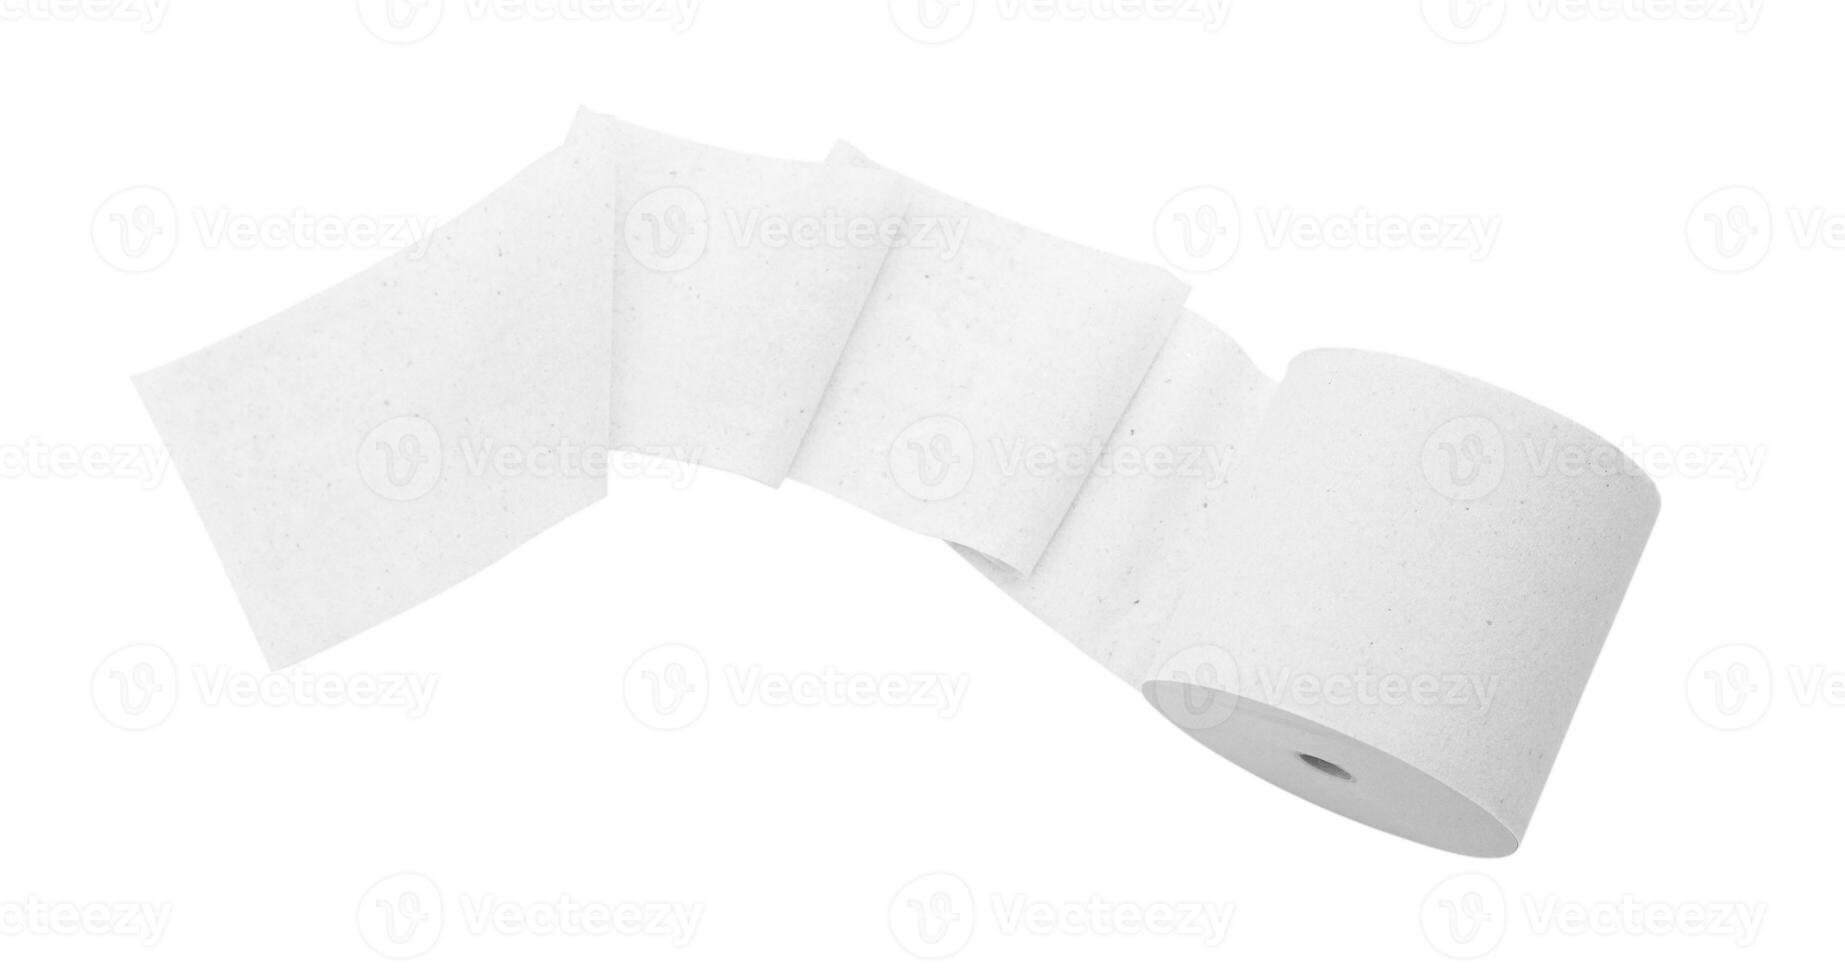 Paper roll mock up isolated on white background. Blank white packaging kitchen towel, toilet paper roll, cash register tape, thermal fax roll. Paper roll template. Top view. photo